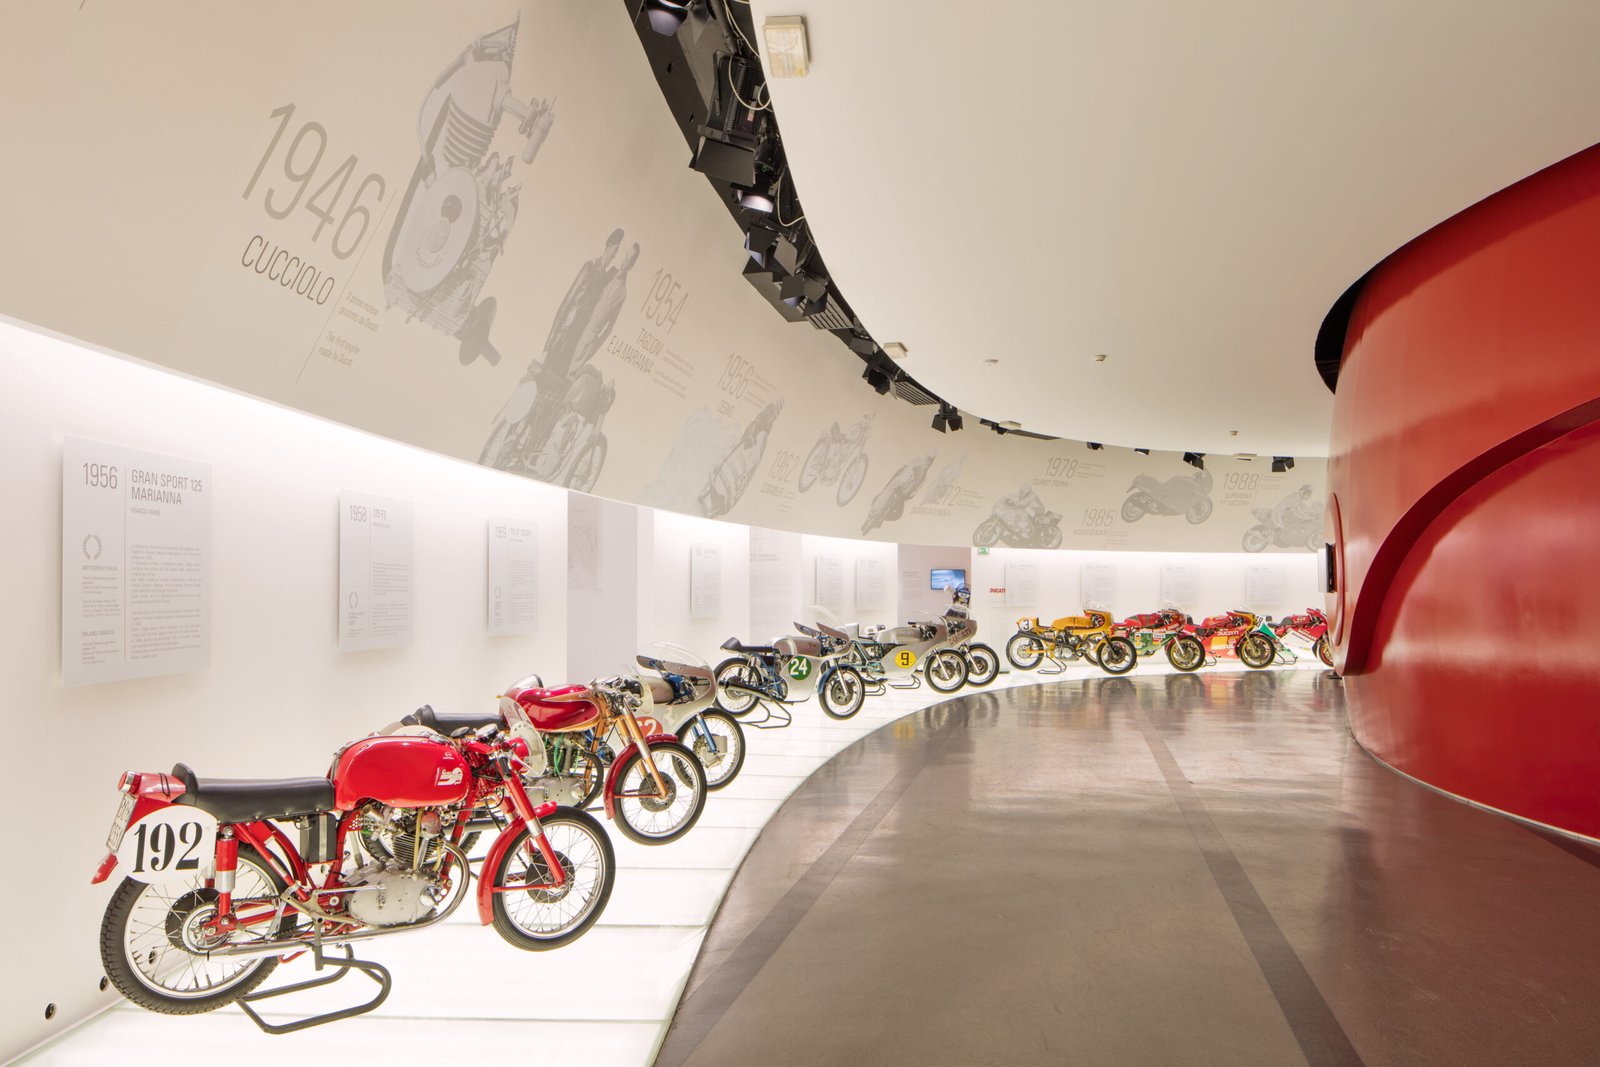 The Ducati Museum hosts the third round of the 